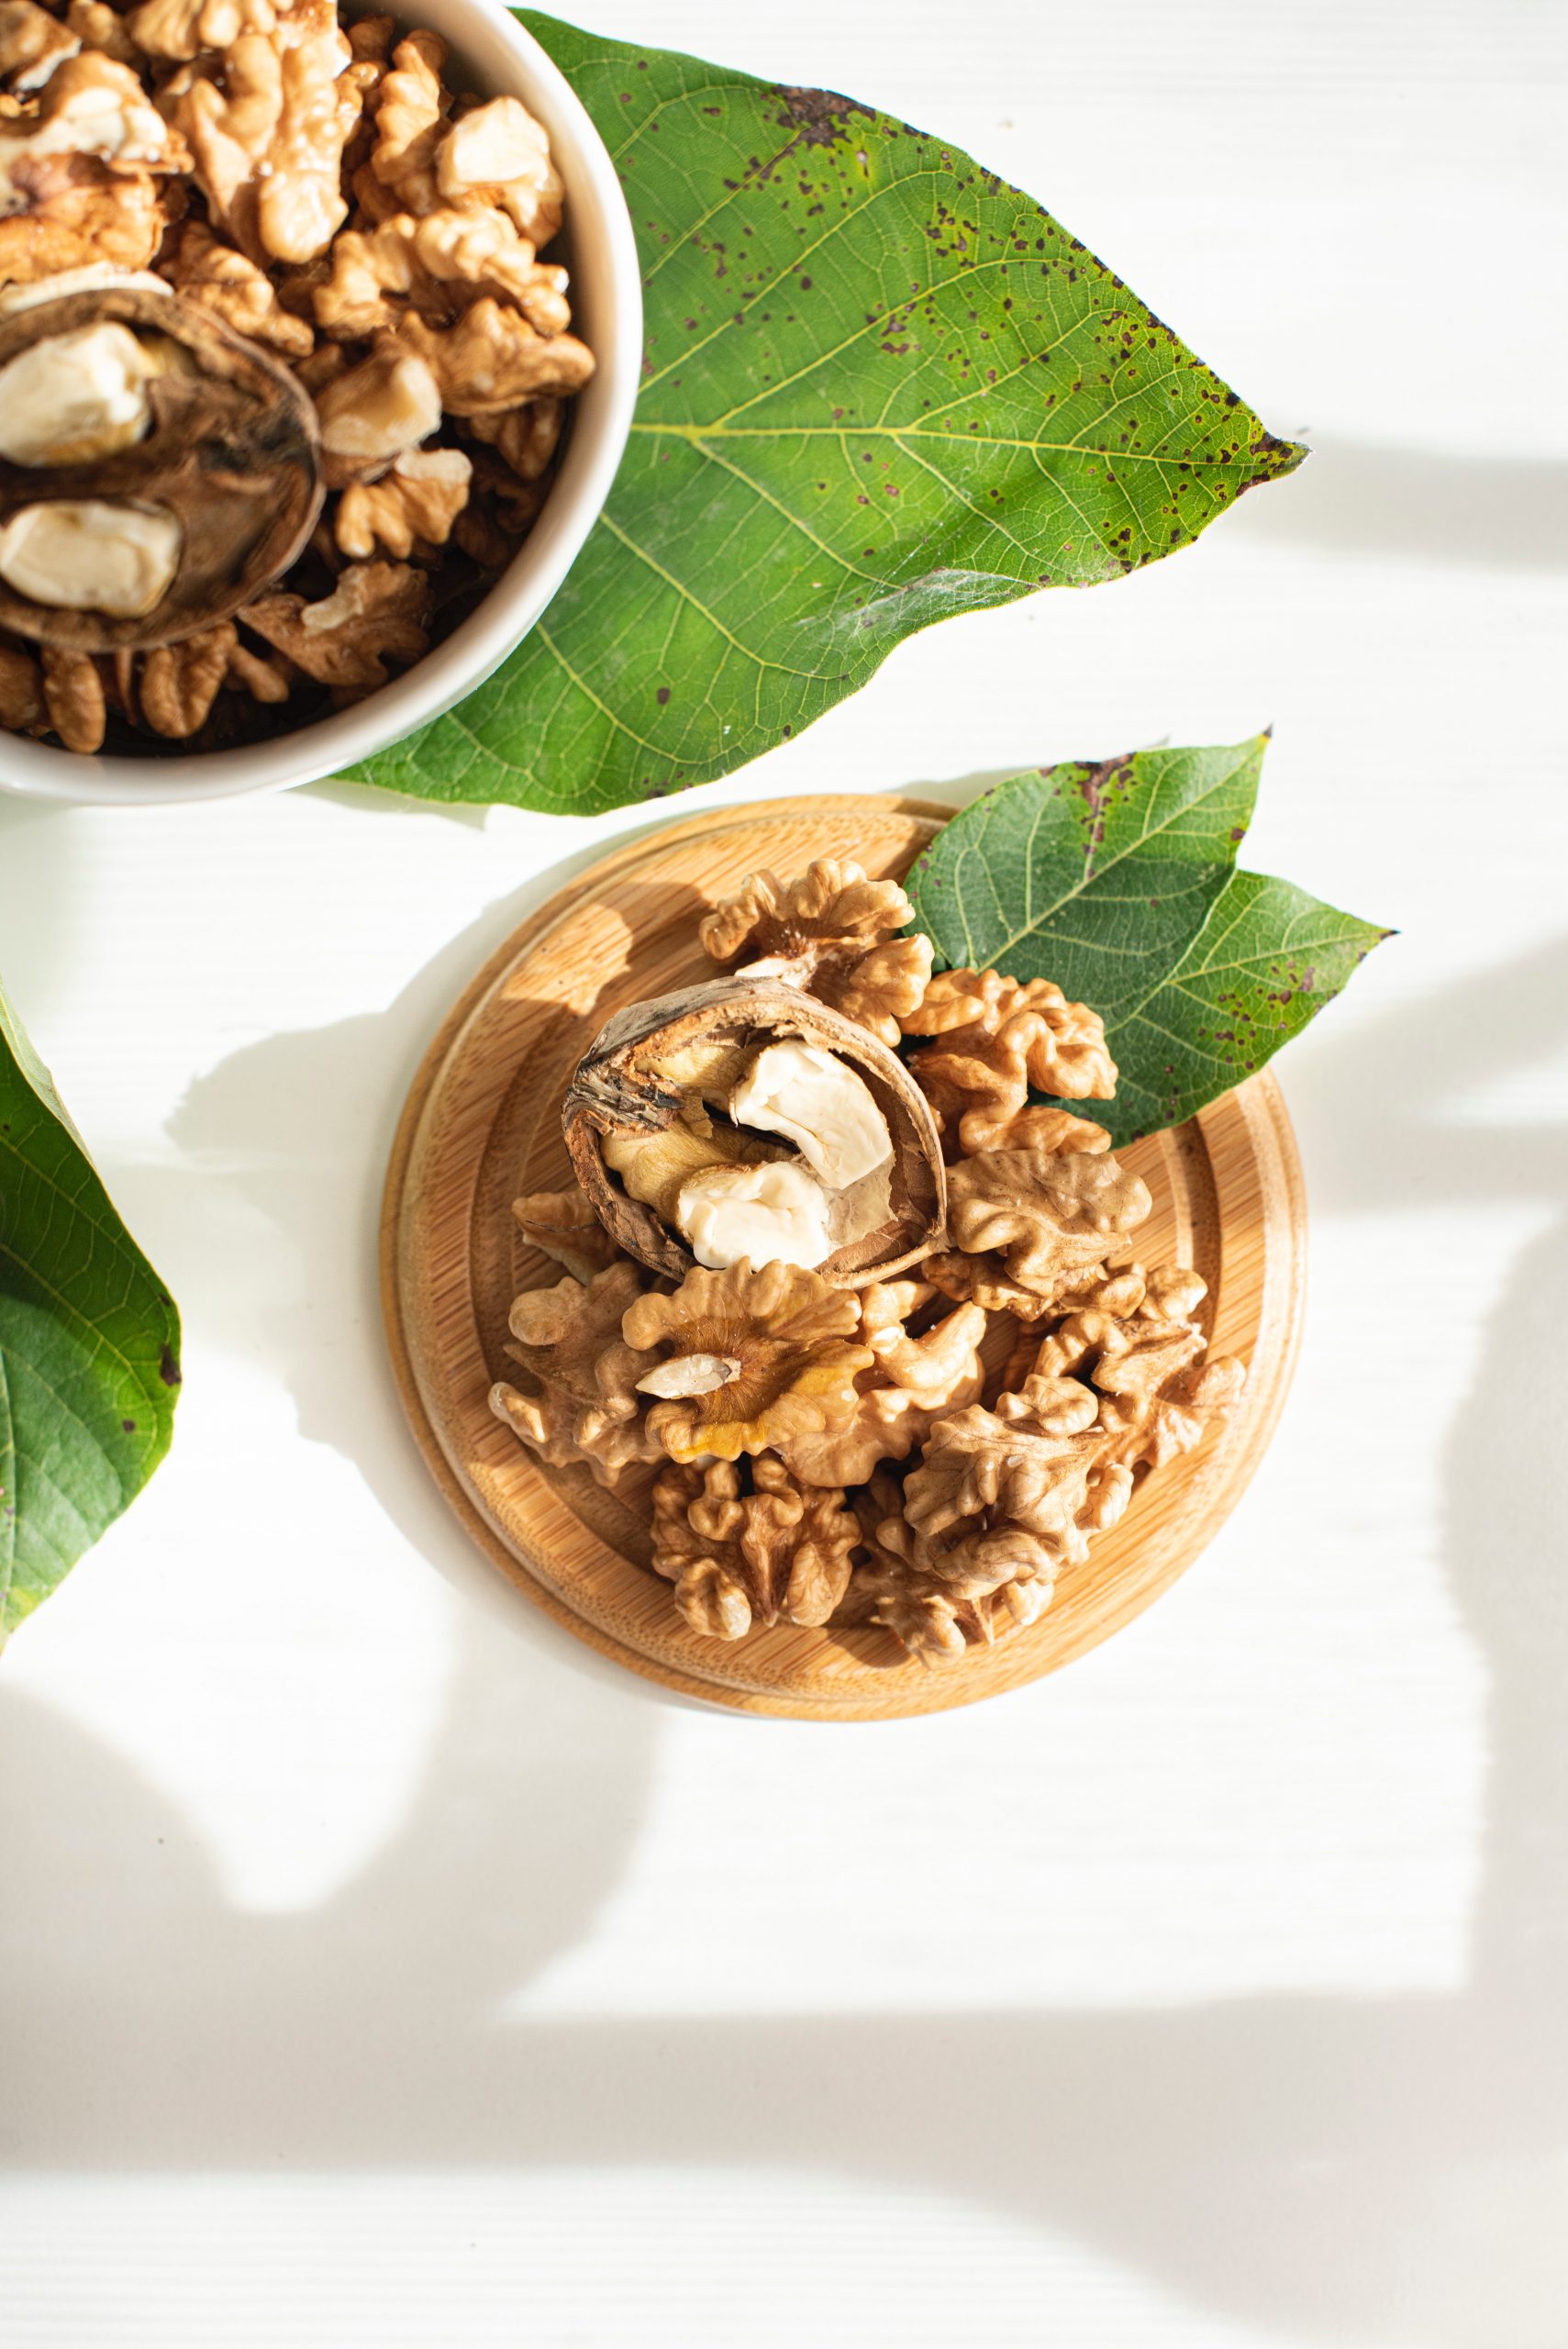 Go Vegan Lifestyle: Nuts and seeds